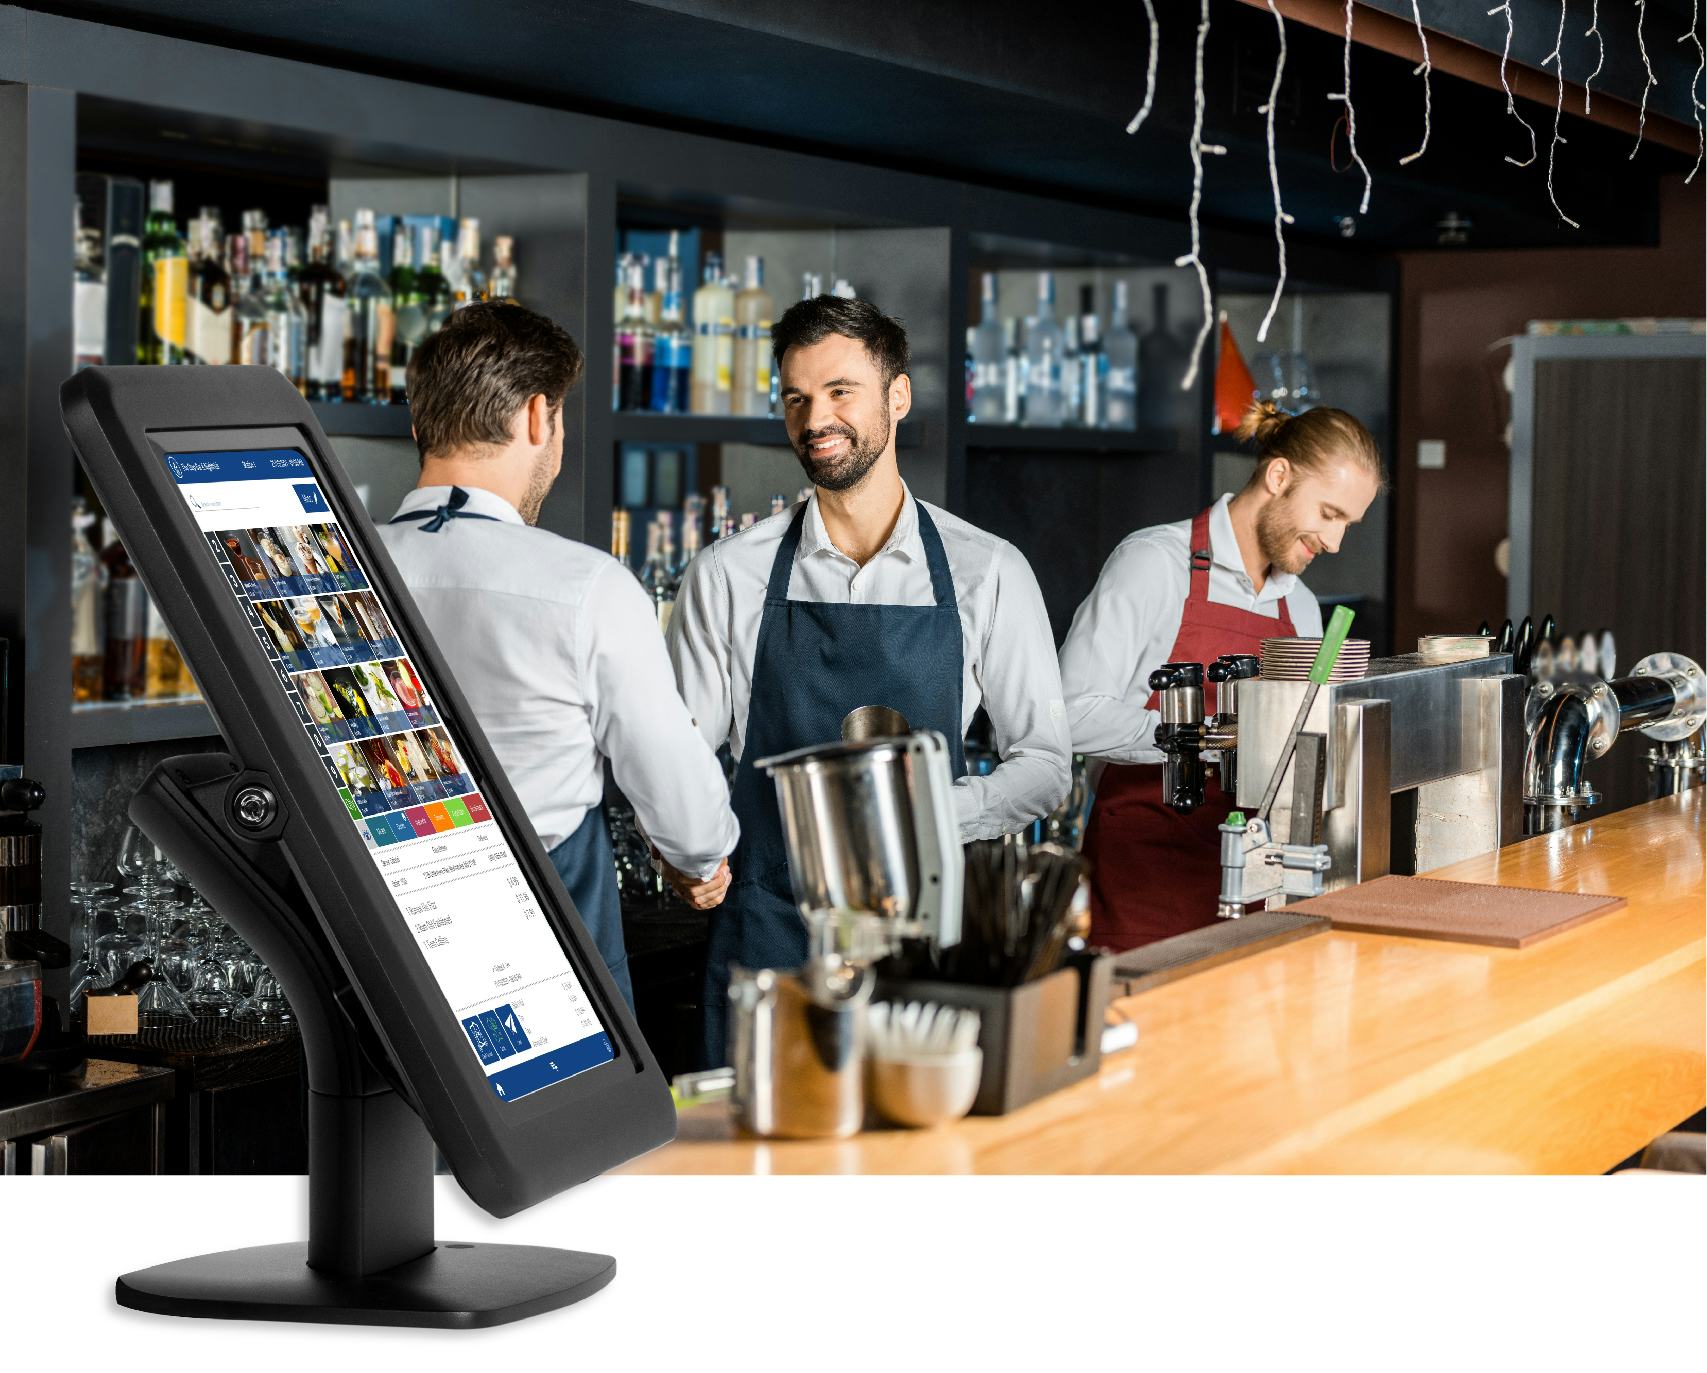 Dessert POS Software - INTUITIVE, FLEXIBLE, FAST For Bar & Nightclub Industry. Manage the nightlife in a different style. DESSERT POS empowers you to keep revenue up and costs down.